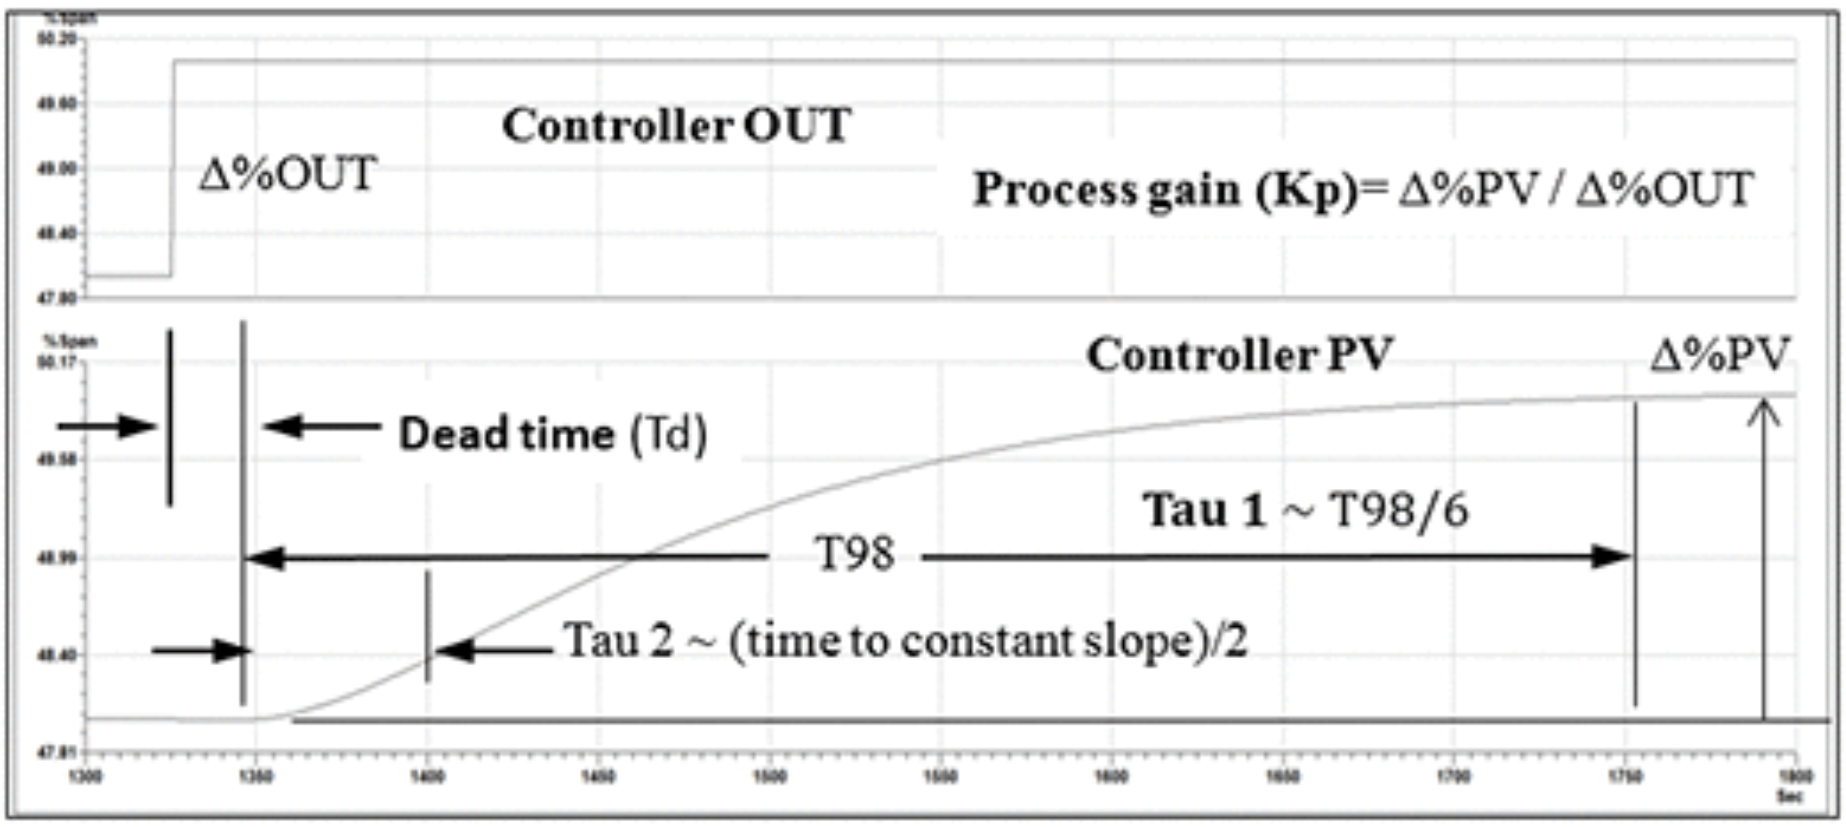 The step response of a process element's empirical model